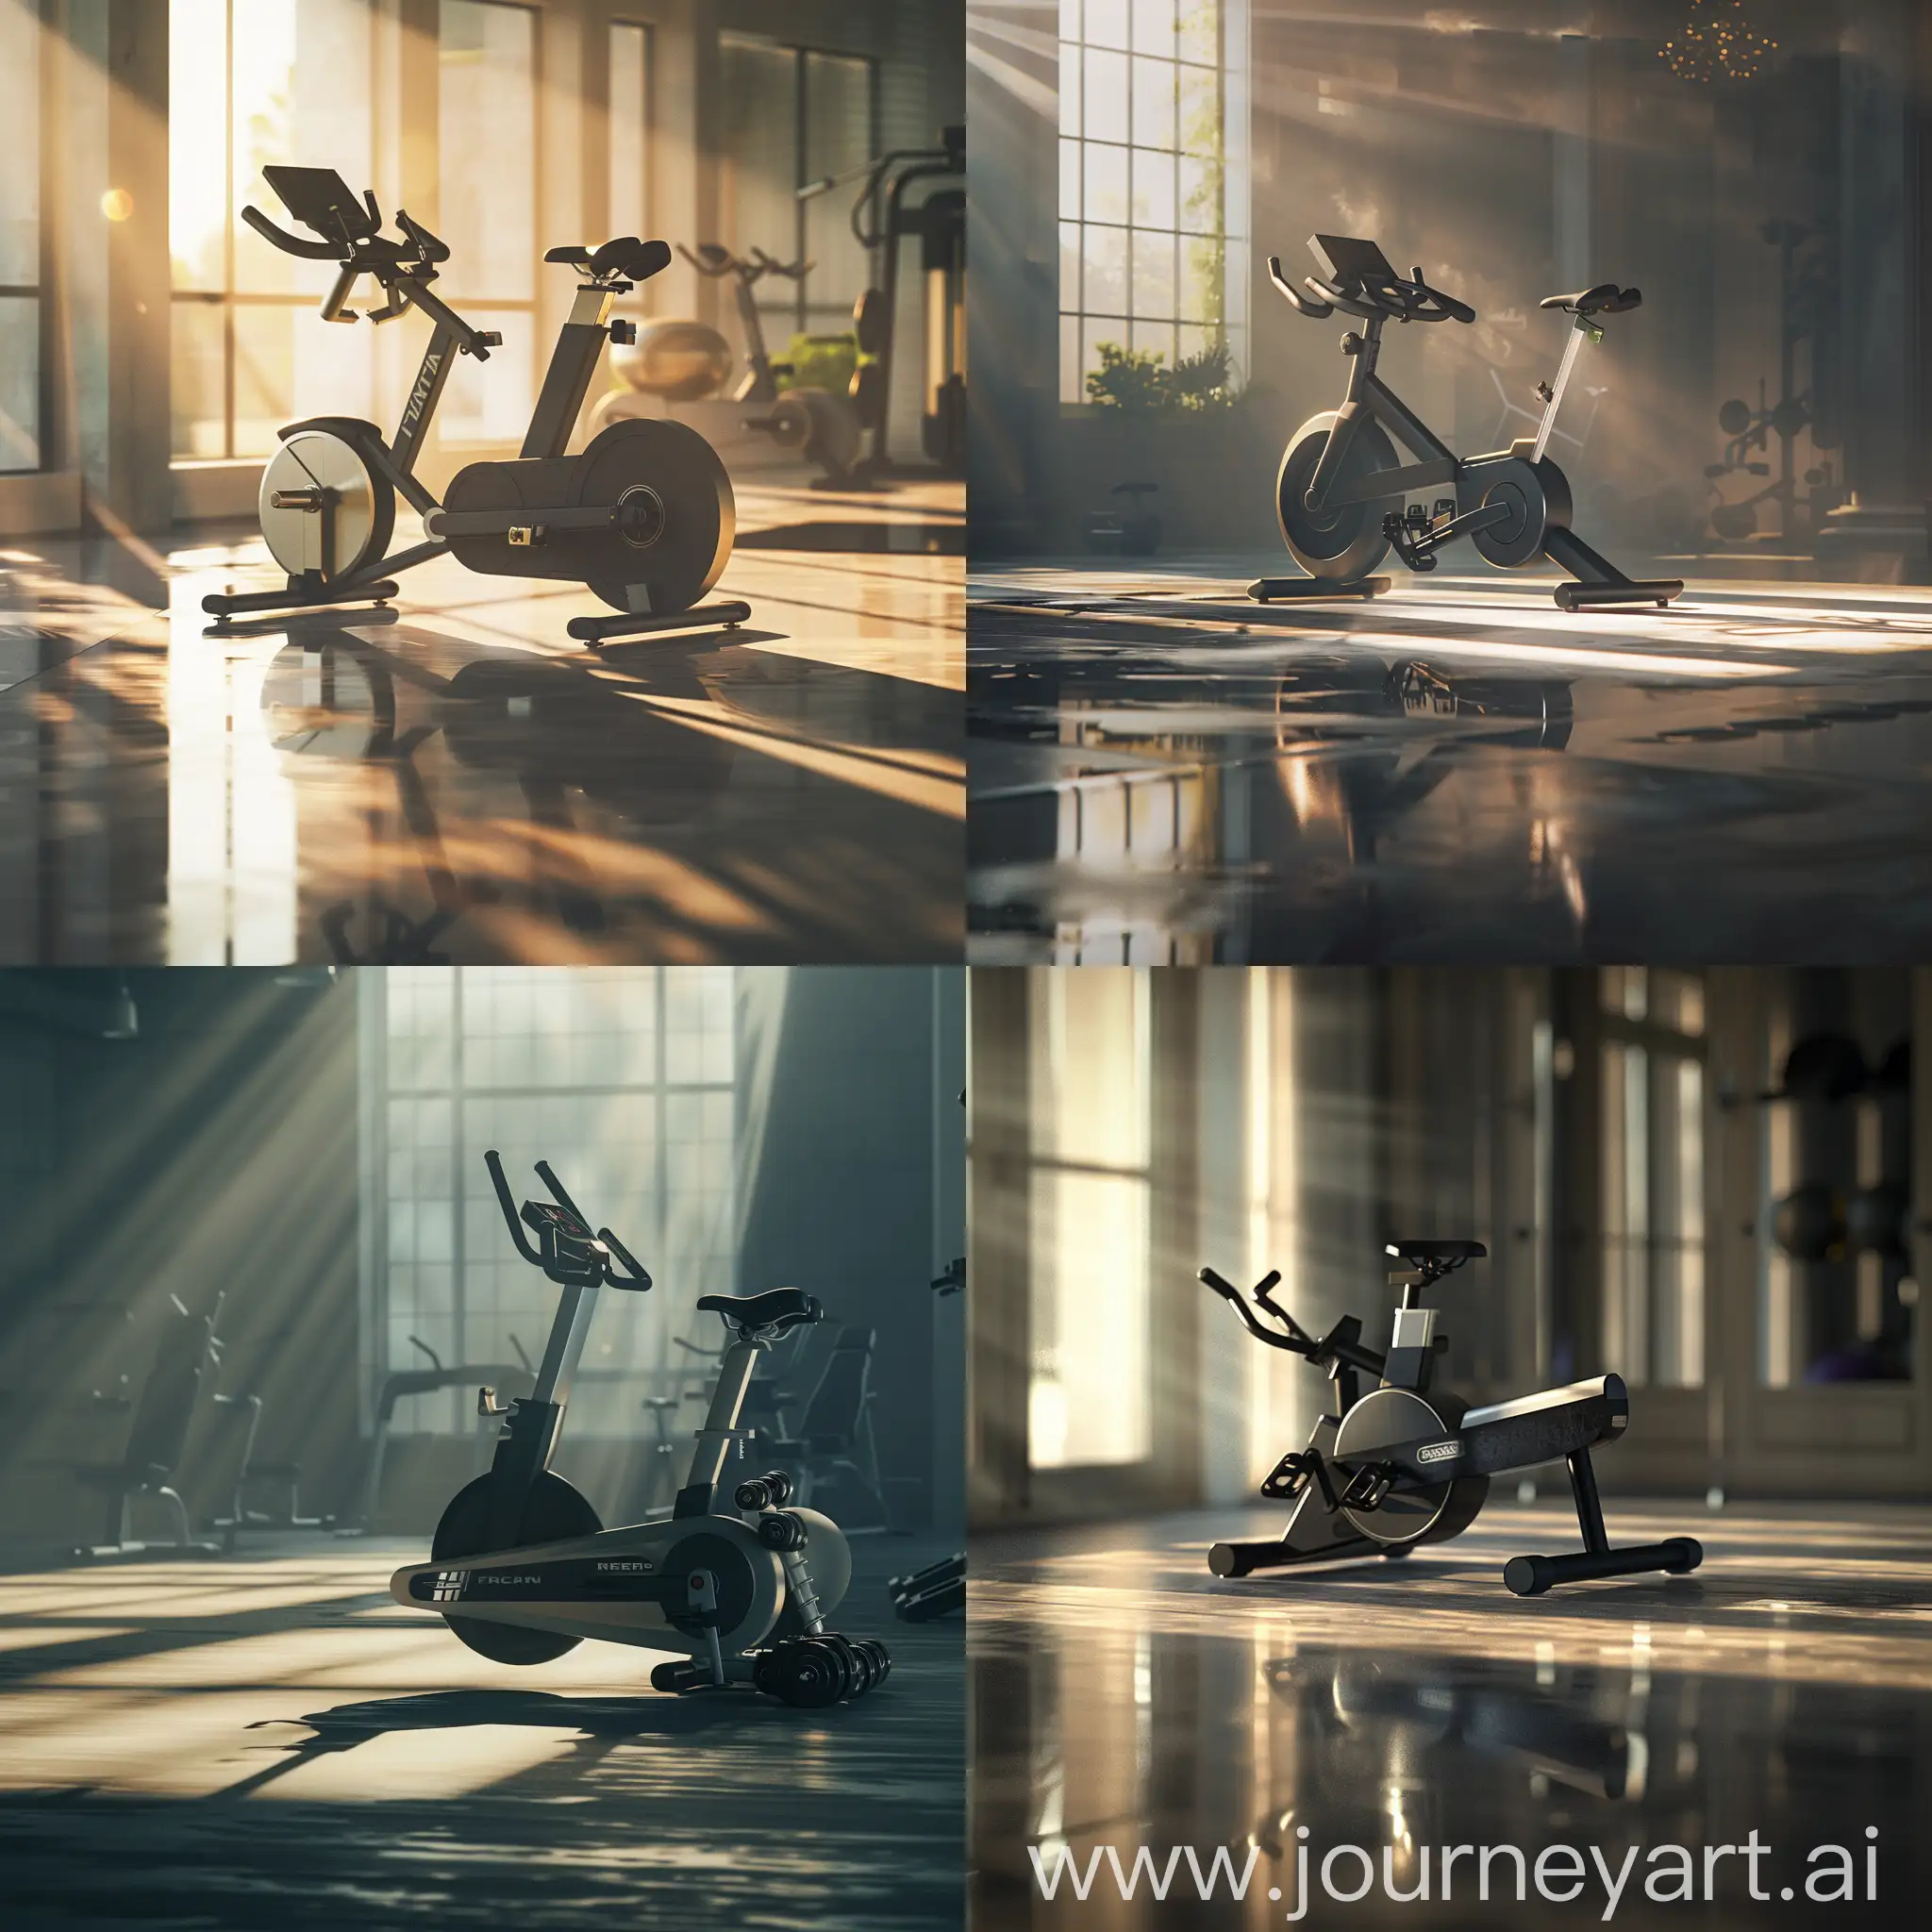 Commercial-Gym-Scene-with-Fitness-Bike-in-Advanced-Lighting